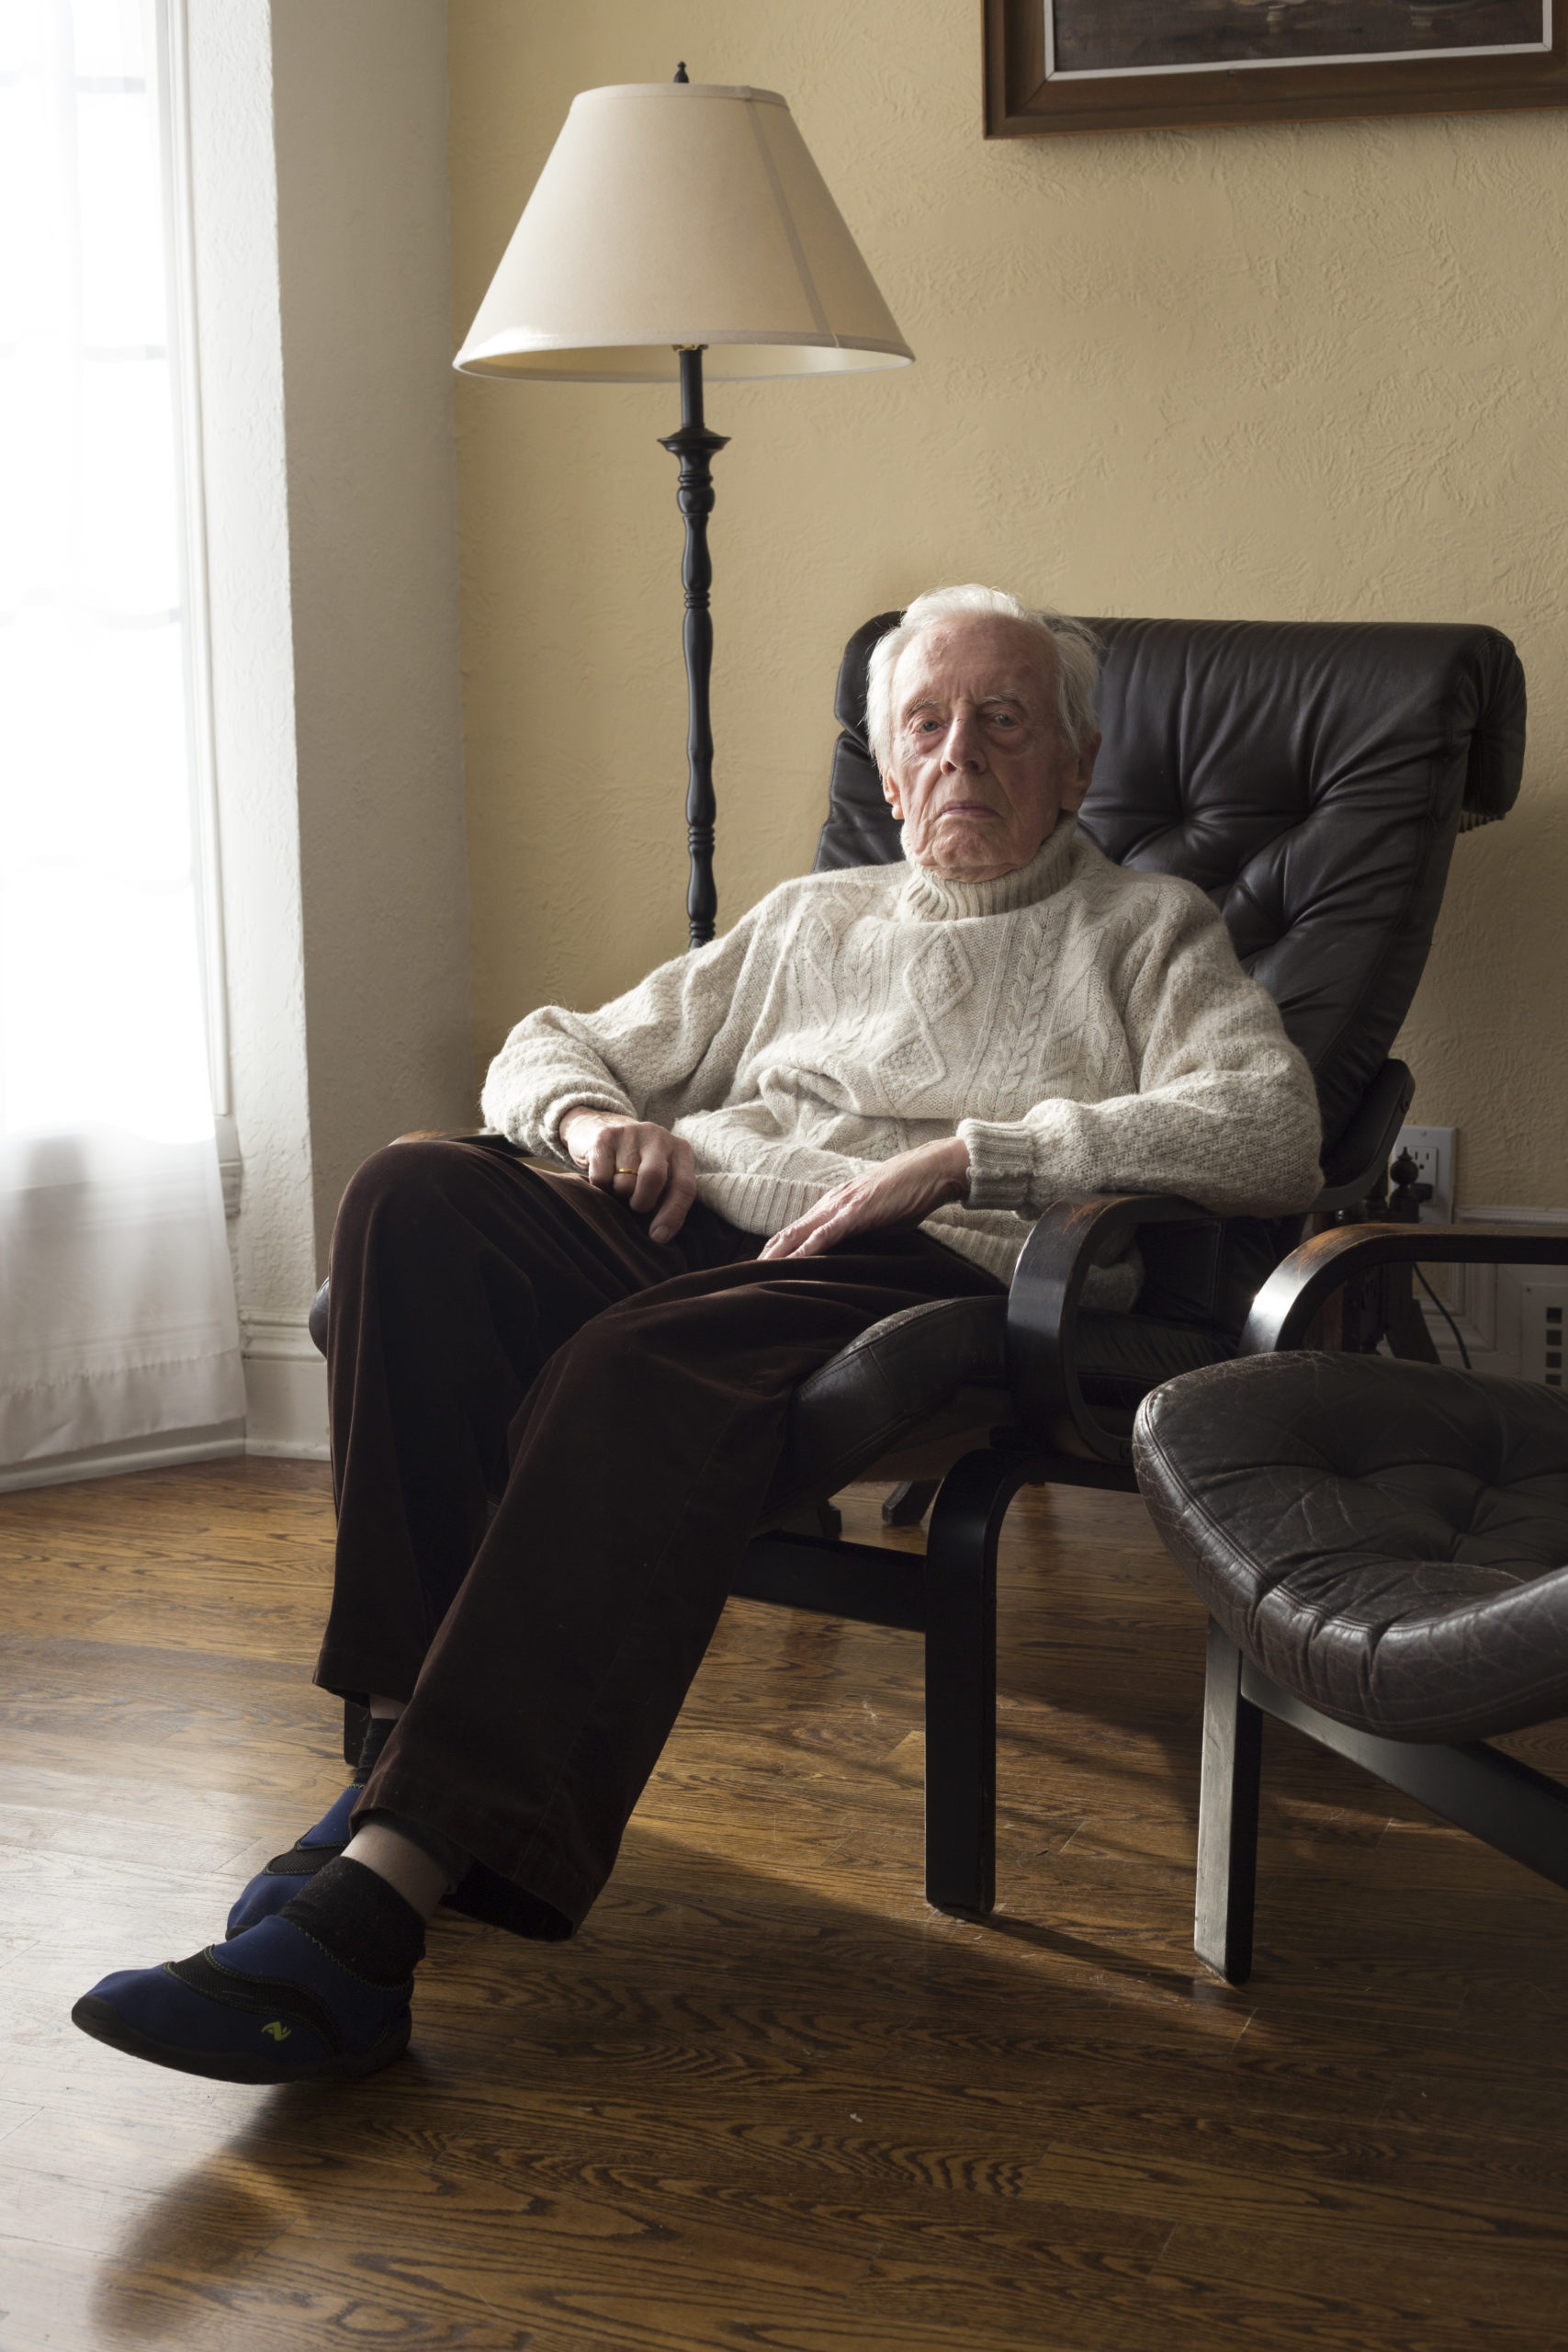 An older gentleman sits in a leather armchair and looks directly into the camera